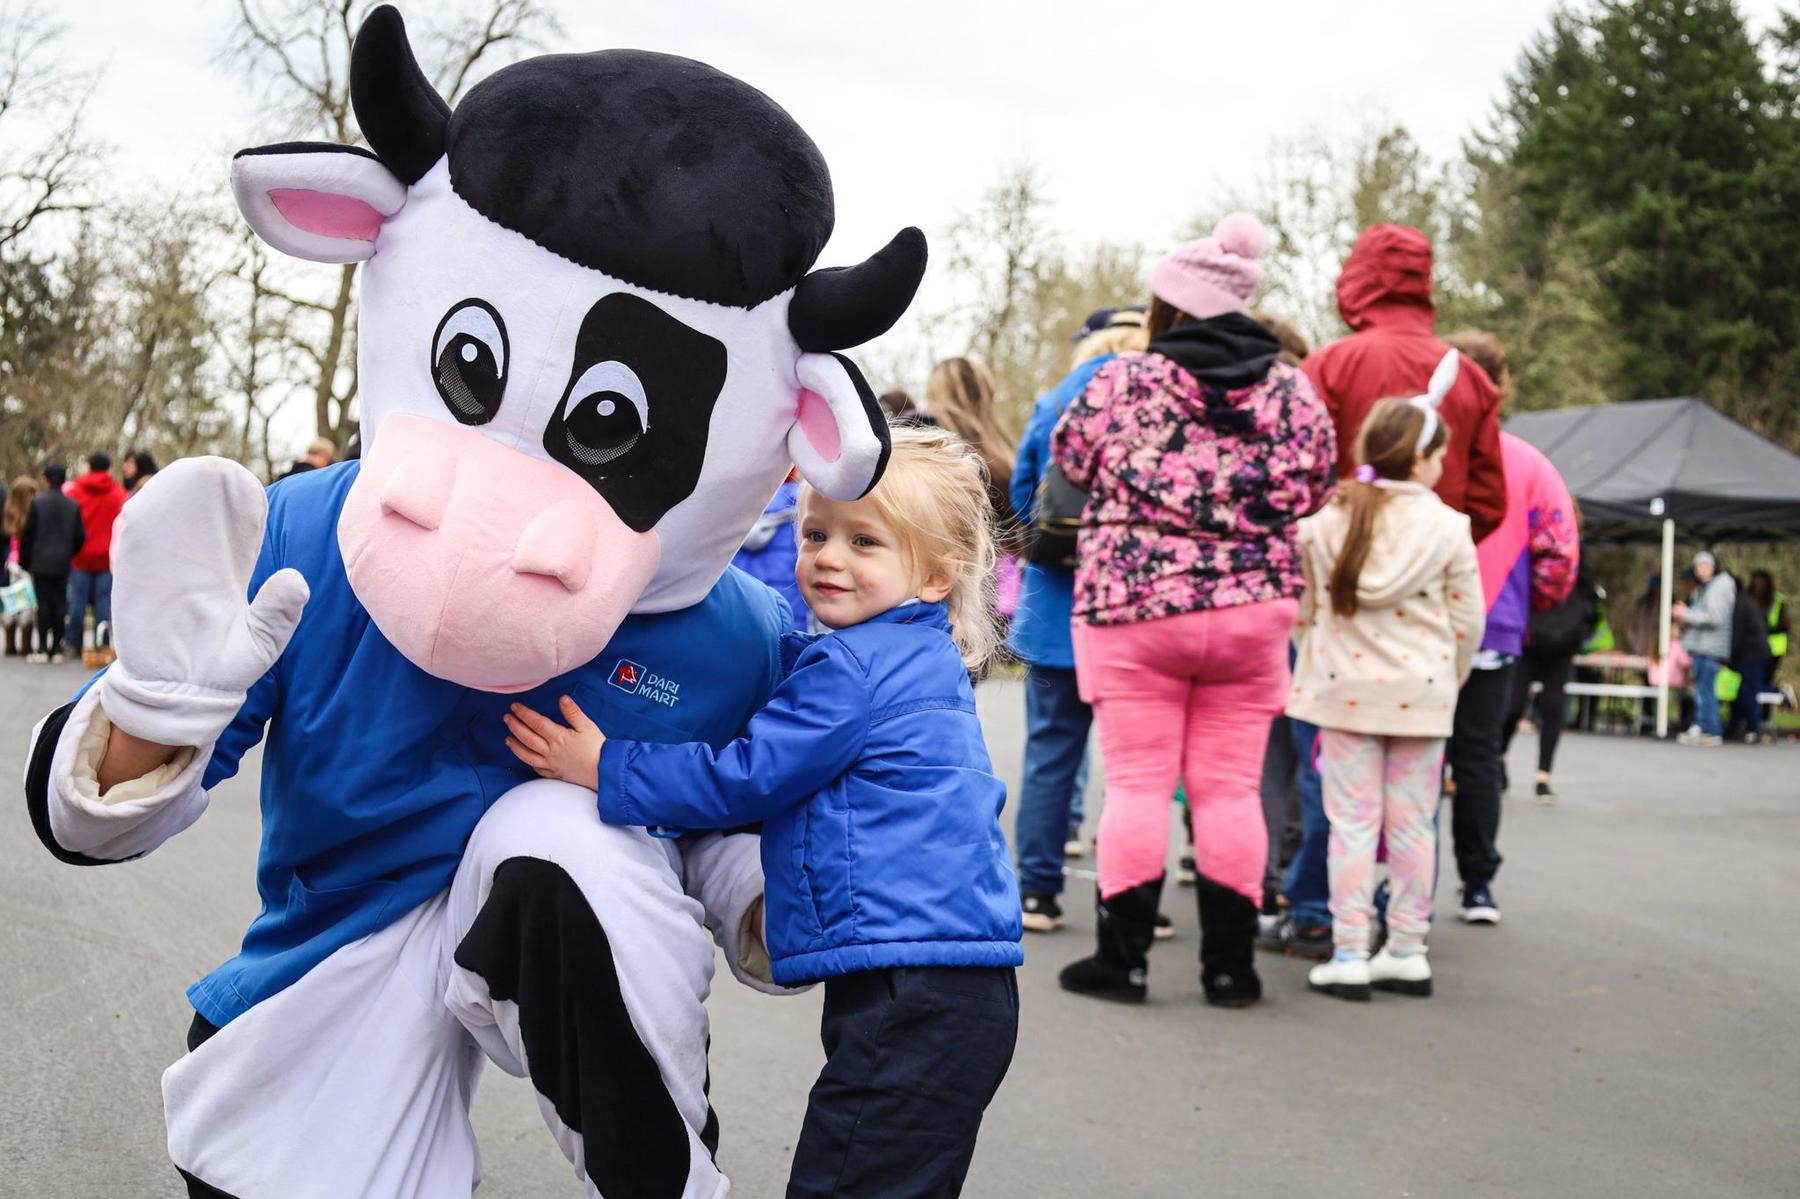 Marti the cow from Dari Mart poses with a young child at Megga Hunt